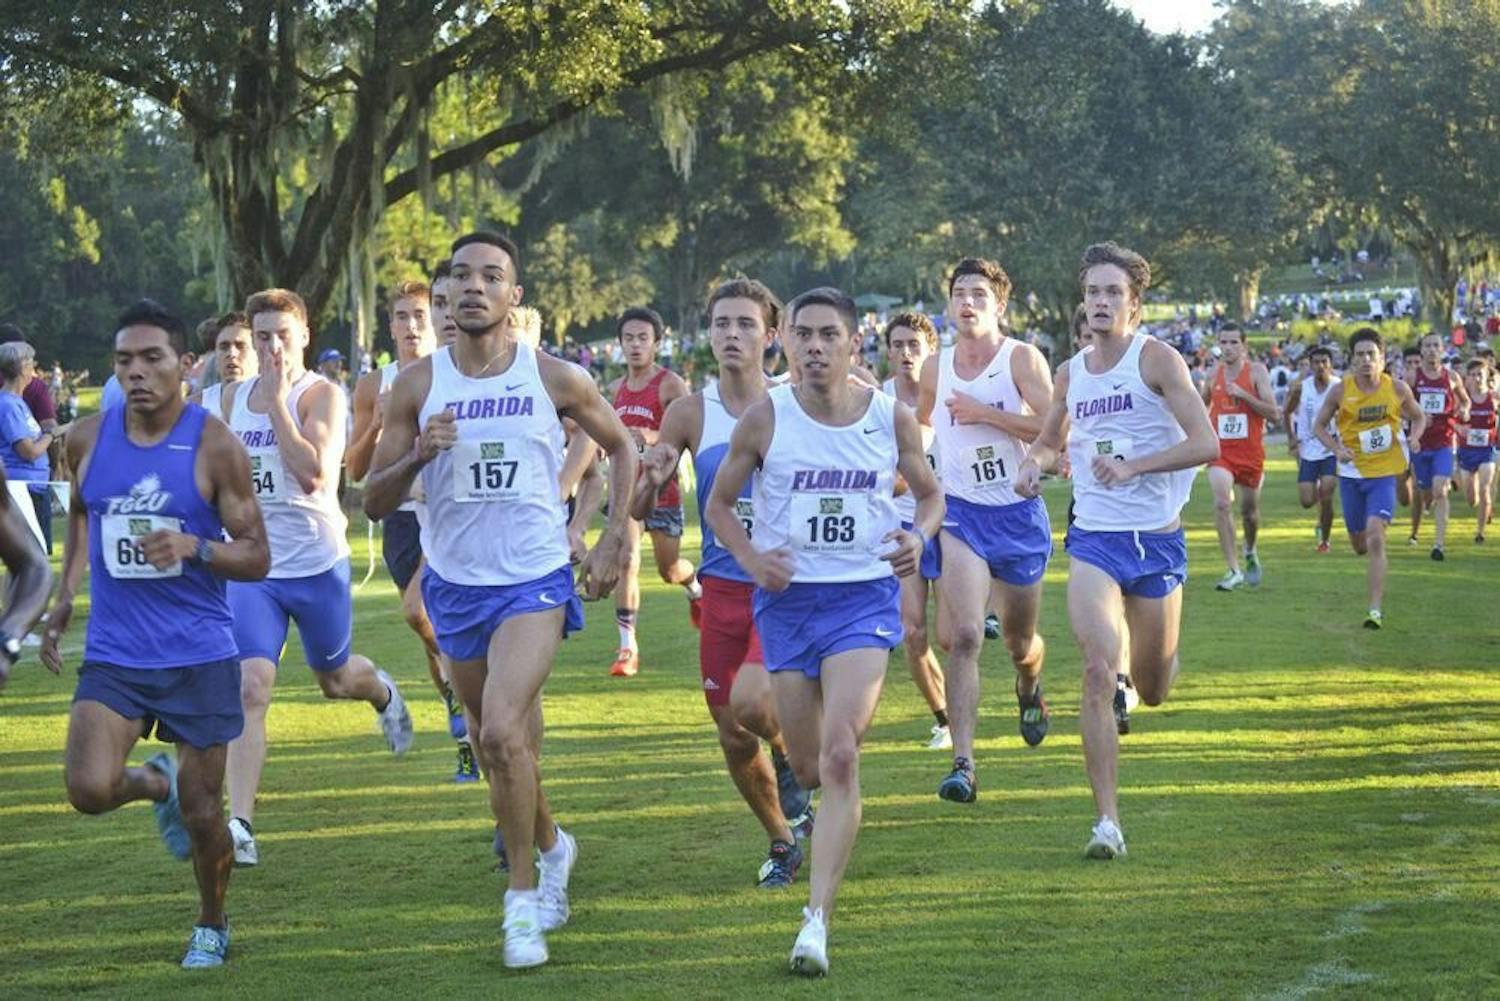 The Gators placed third at the Mountain Dew Invitational Friday. It was the first UF sporting event in six months due to the COVID-19 pandemic.